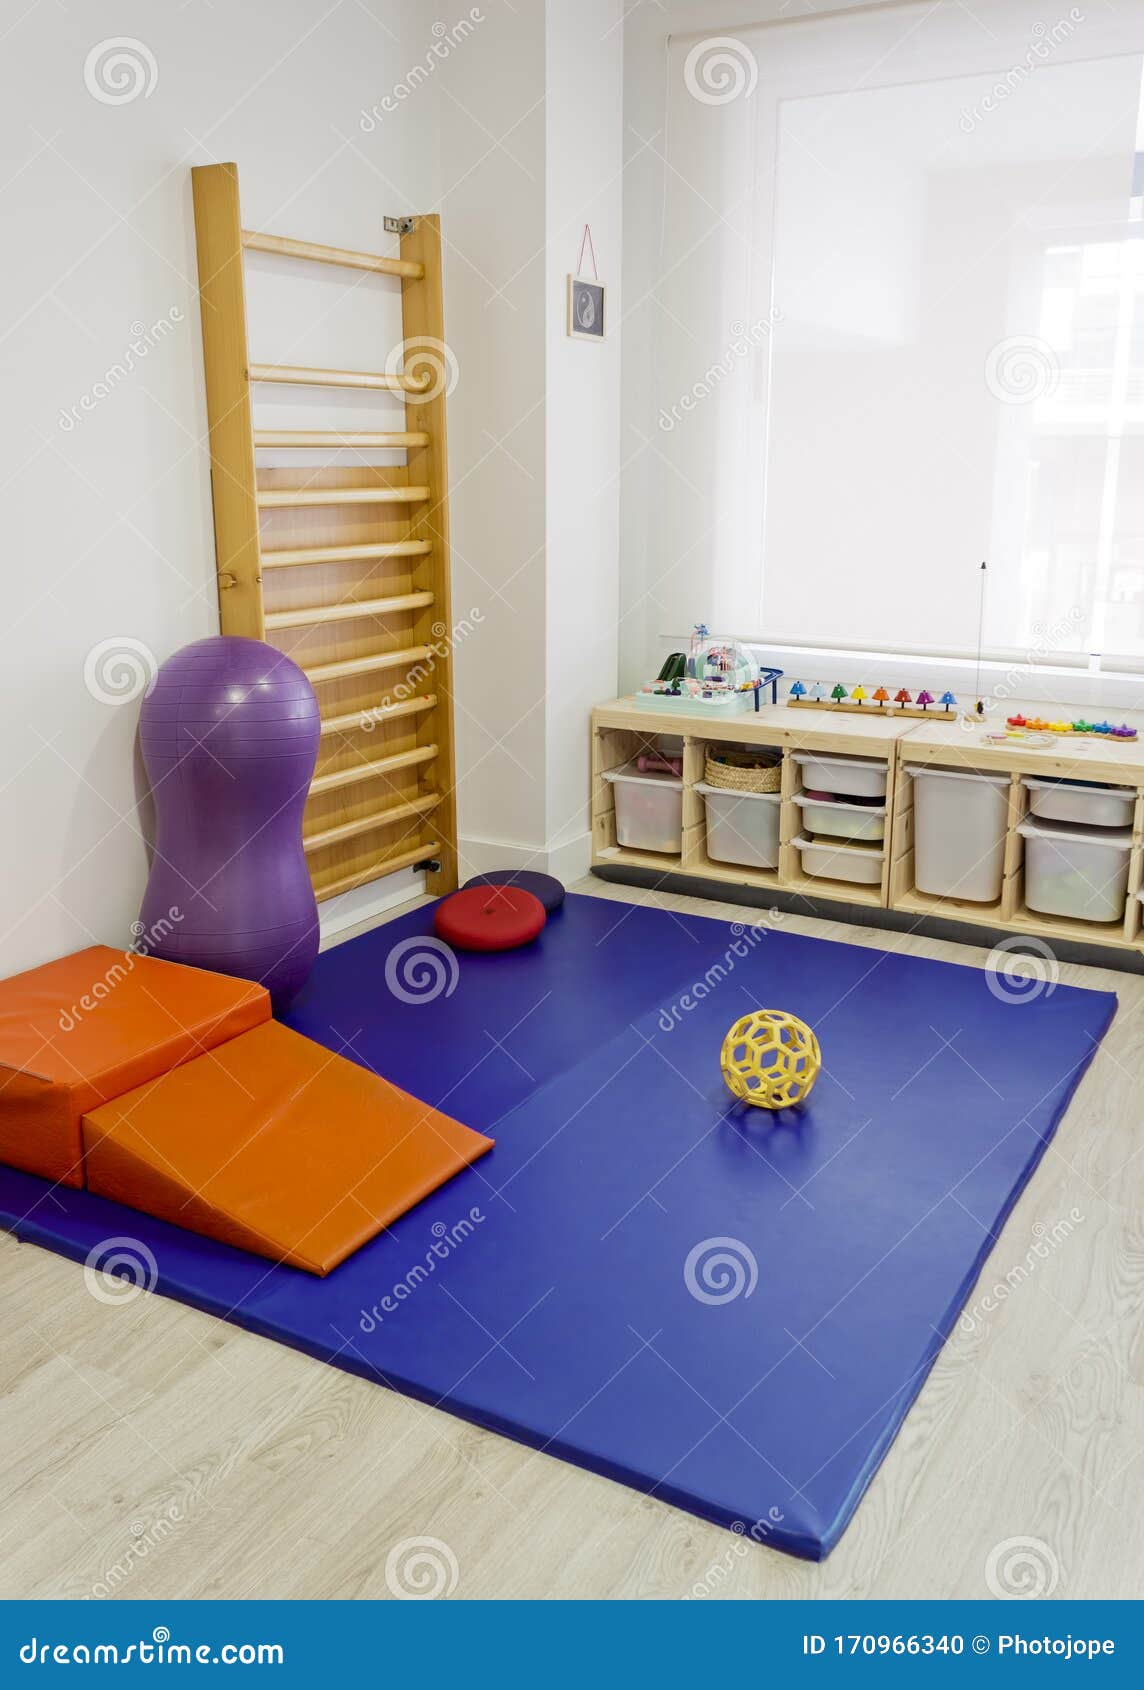 https://thumbs.dreamstime.com/z/empty-physiotherapy-clinic-equipment-kids-rehabilitation-pad-170966340.jpg